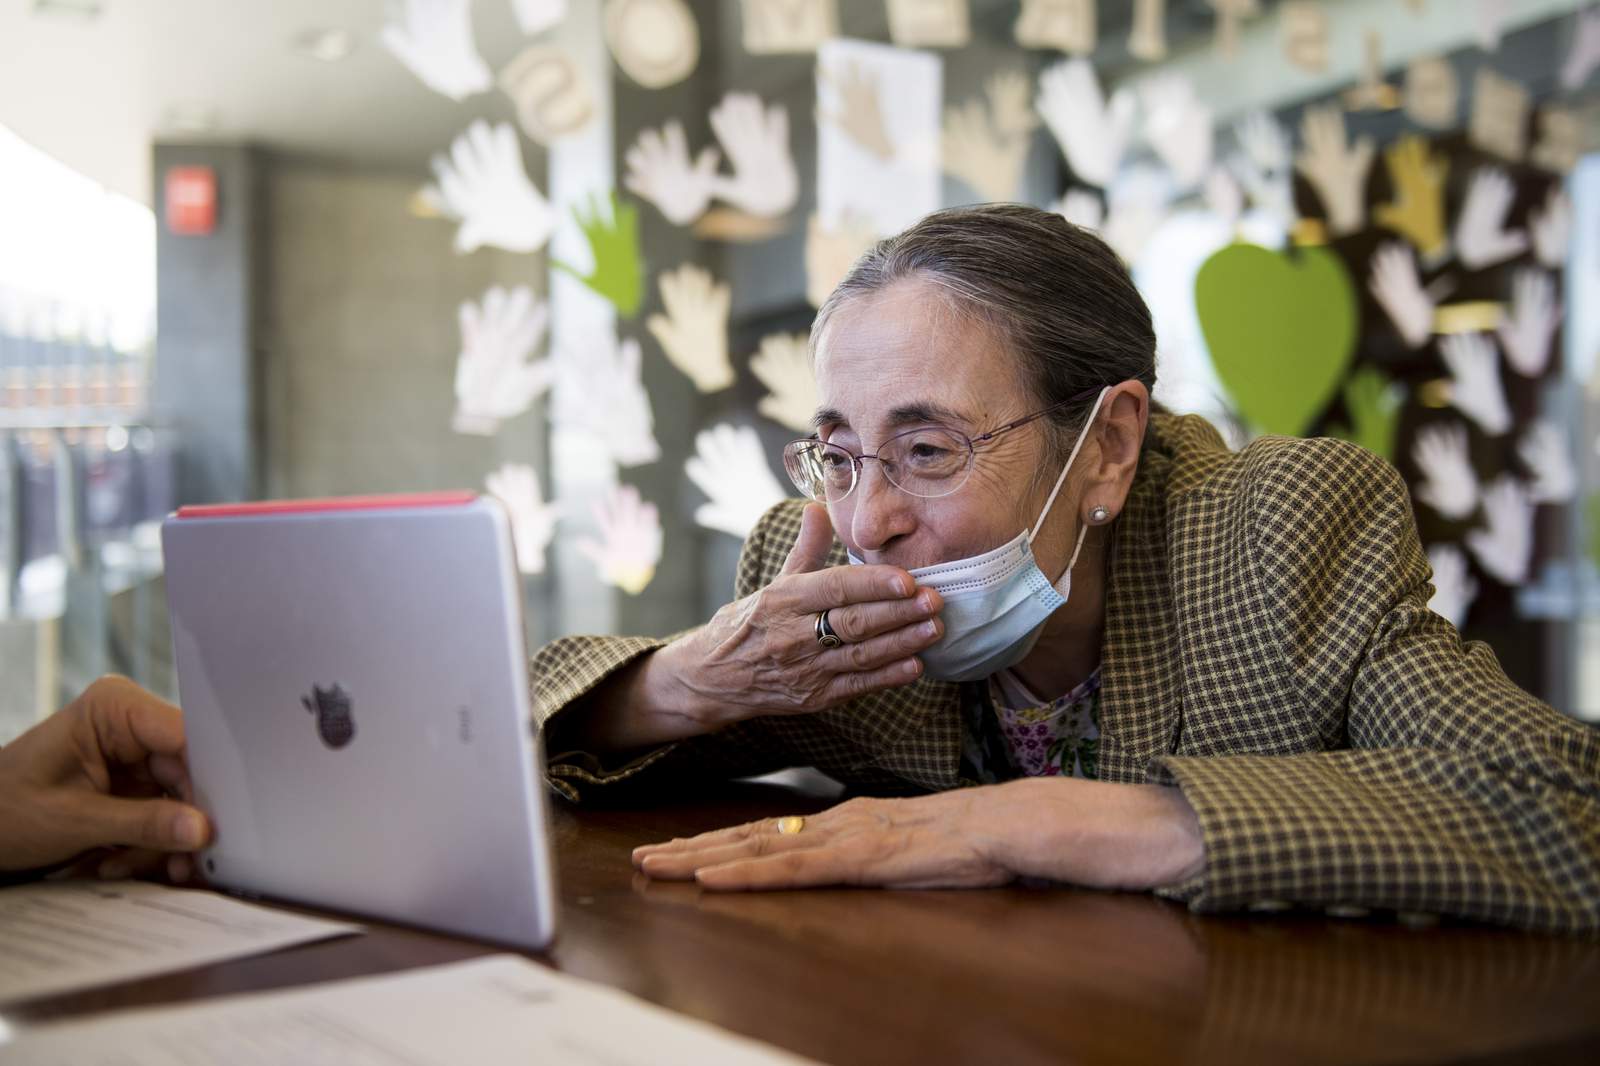 Ann Arbor Senior Center launches digital initiatives to keep older residents engaged